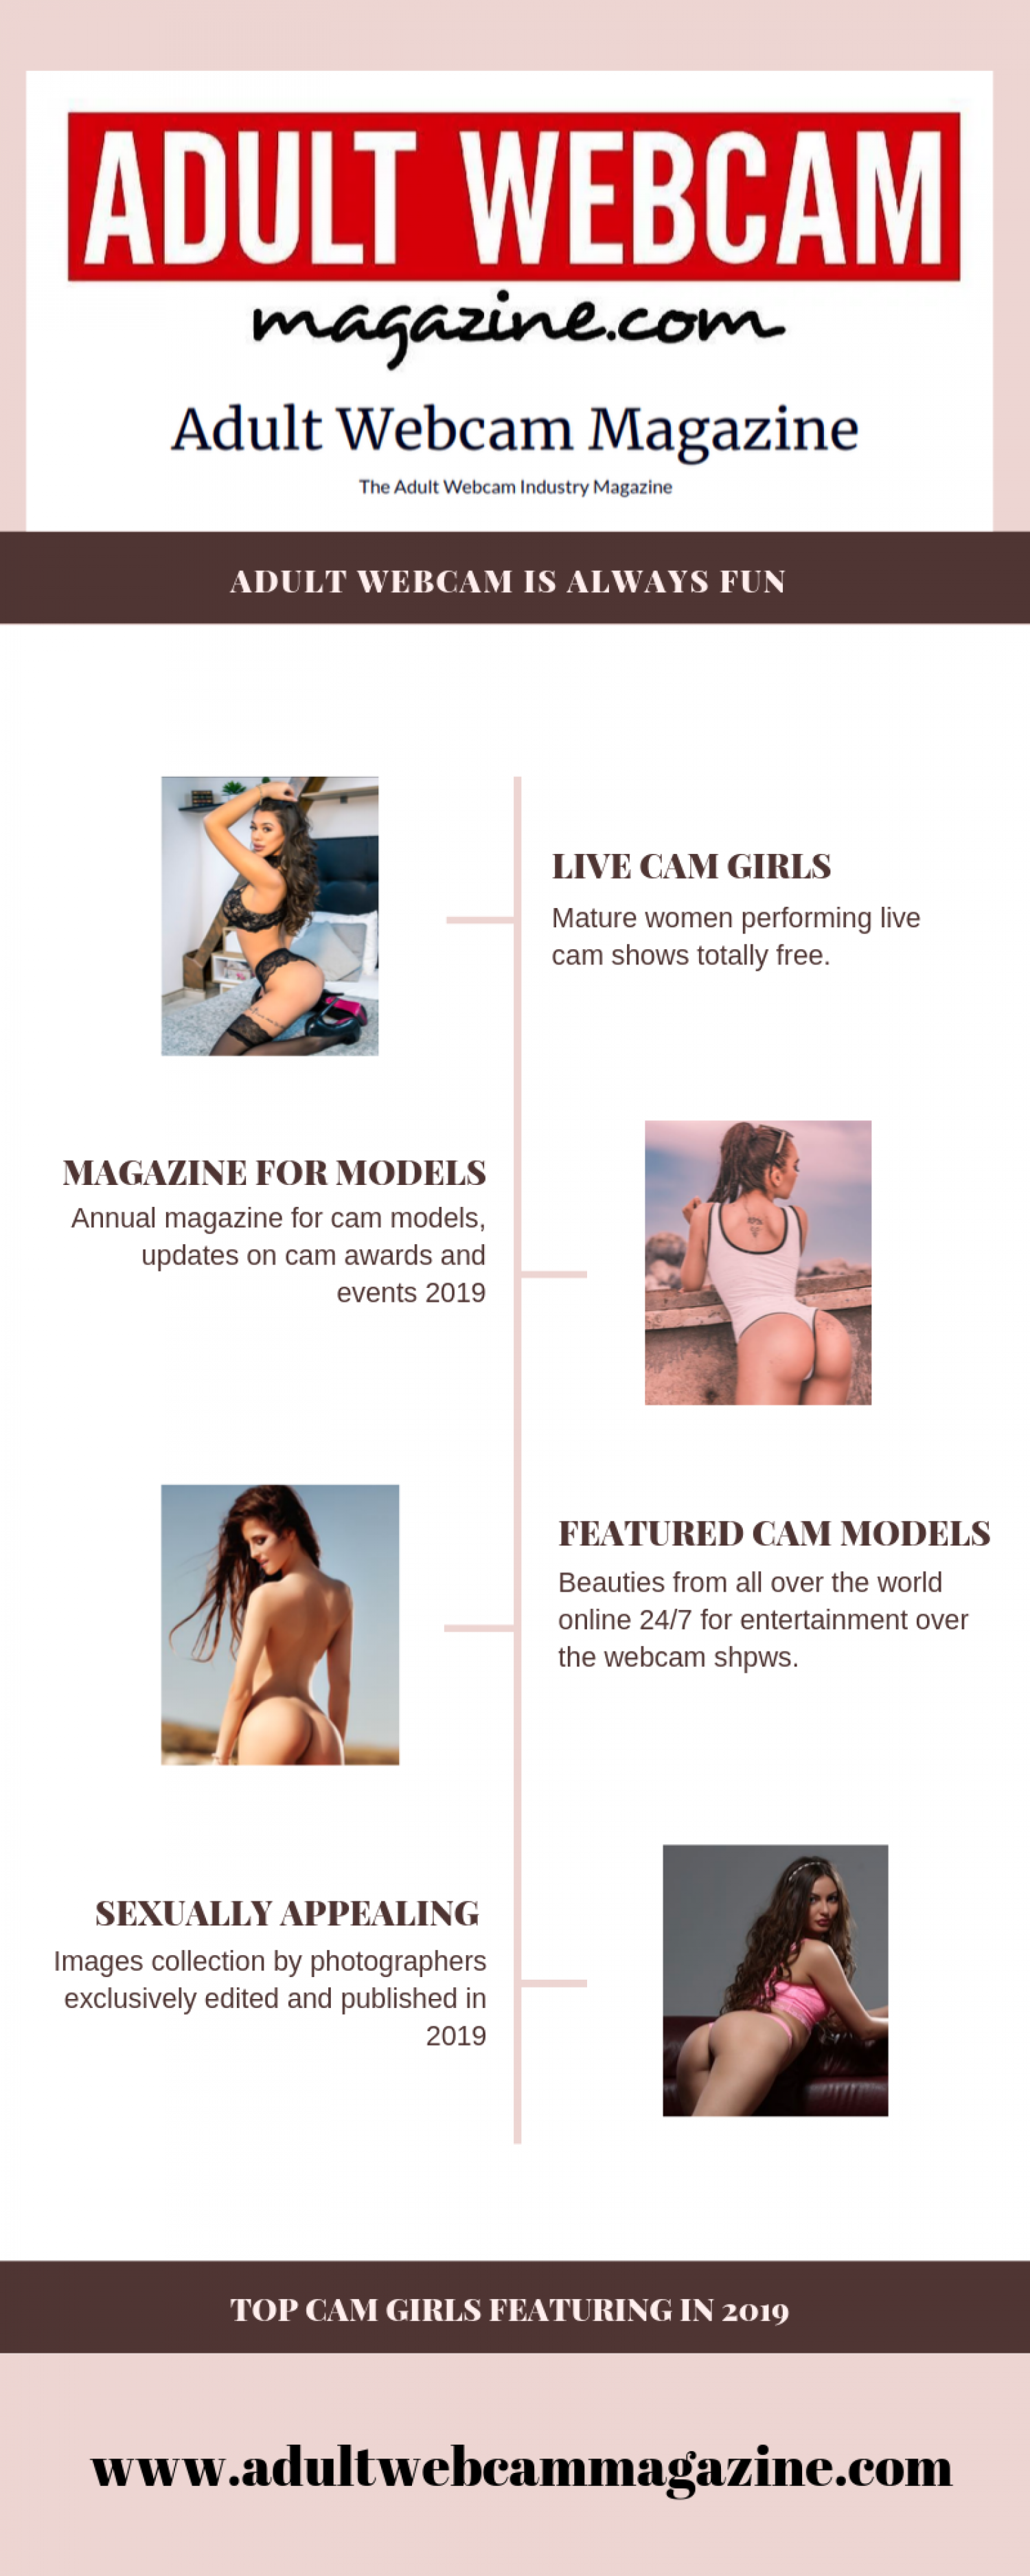 Adult Webcam Magazine Featuring Top Cam Models of 2019 Infographic